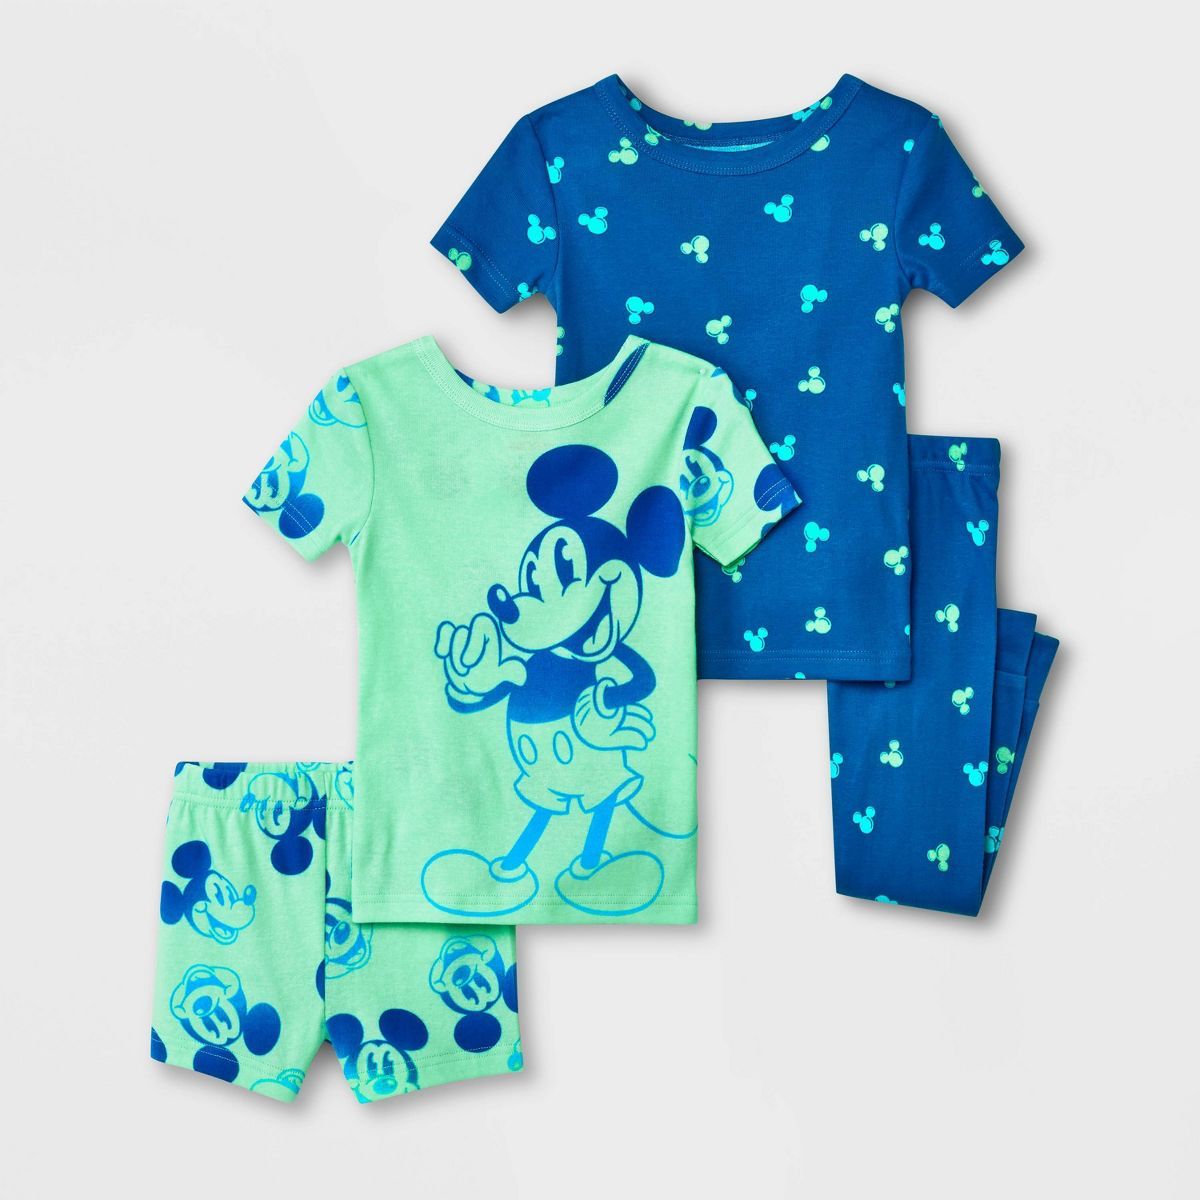 Toddler Boys' 2pc Snug Fit Mickey Mouse & Friends Cotton Pajama Set - Green | Target